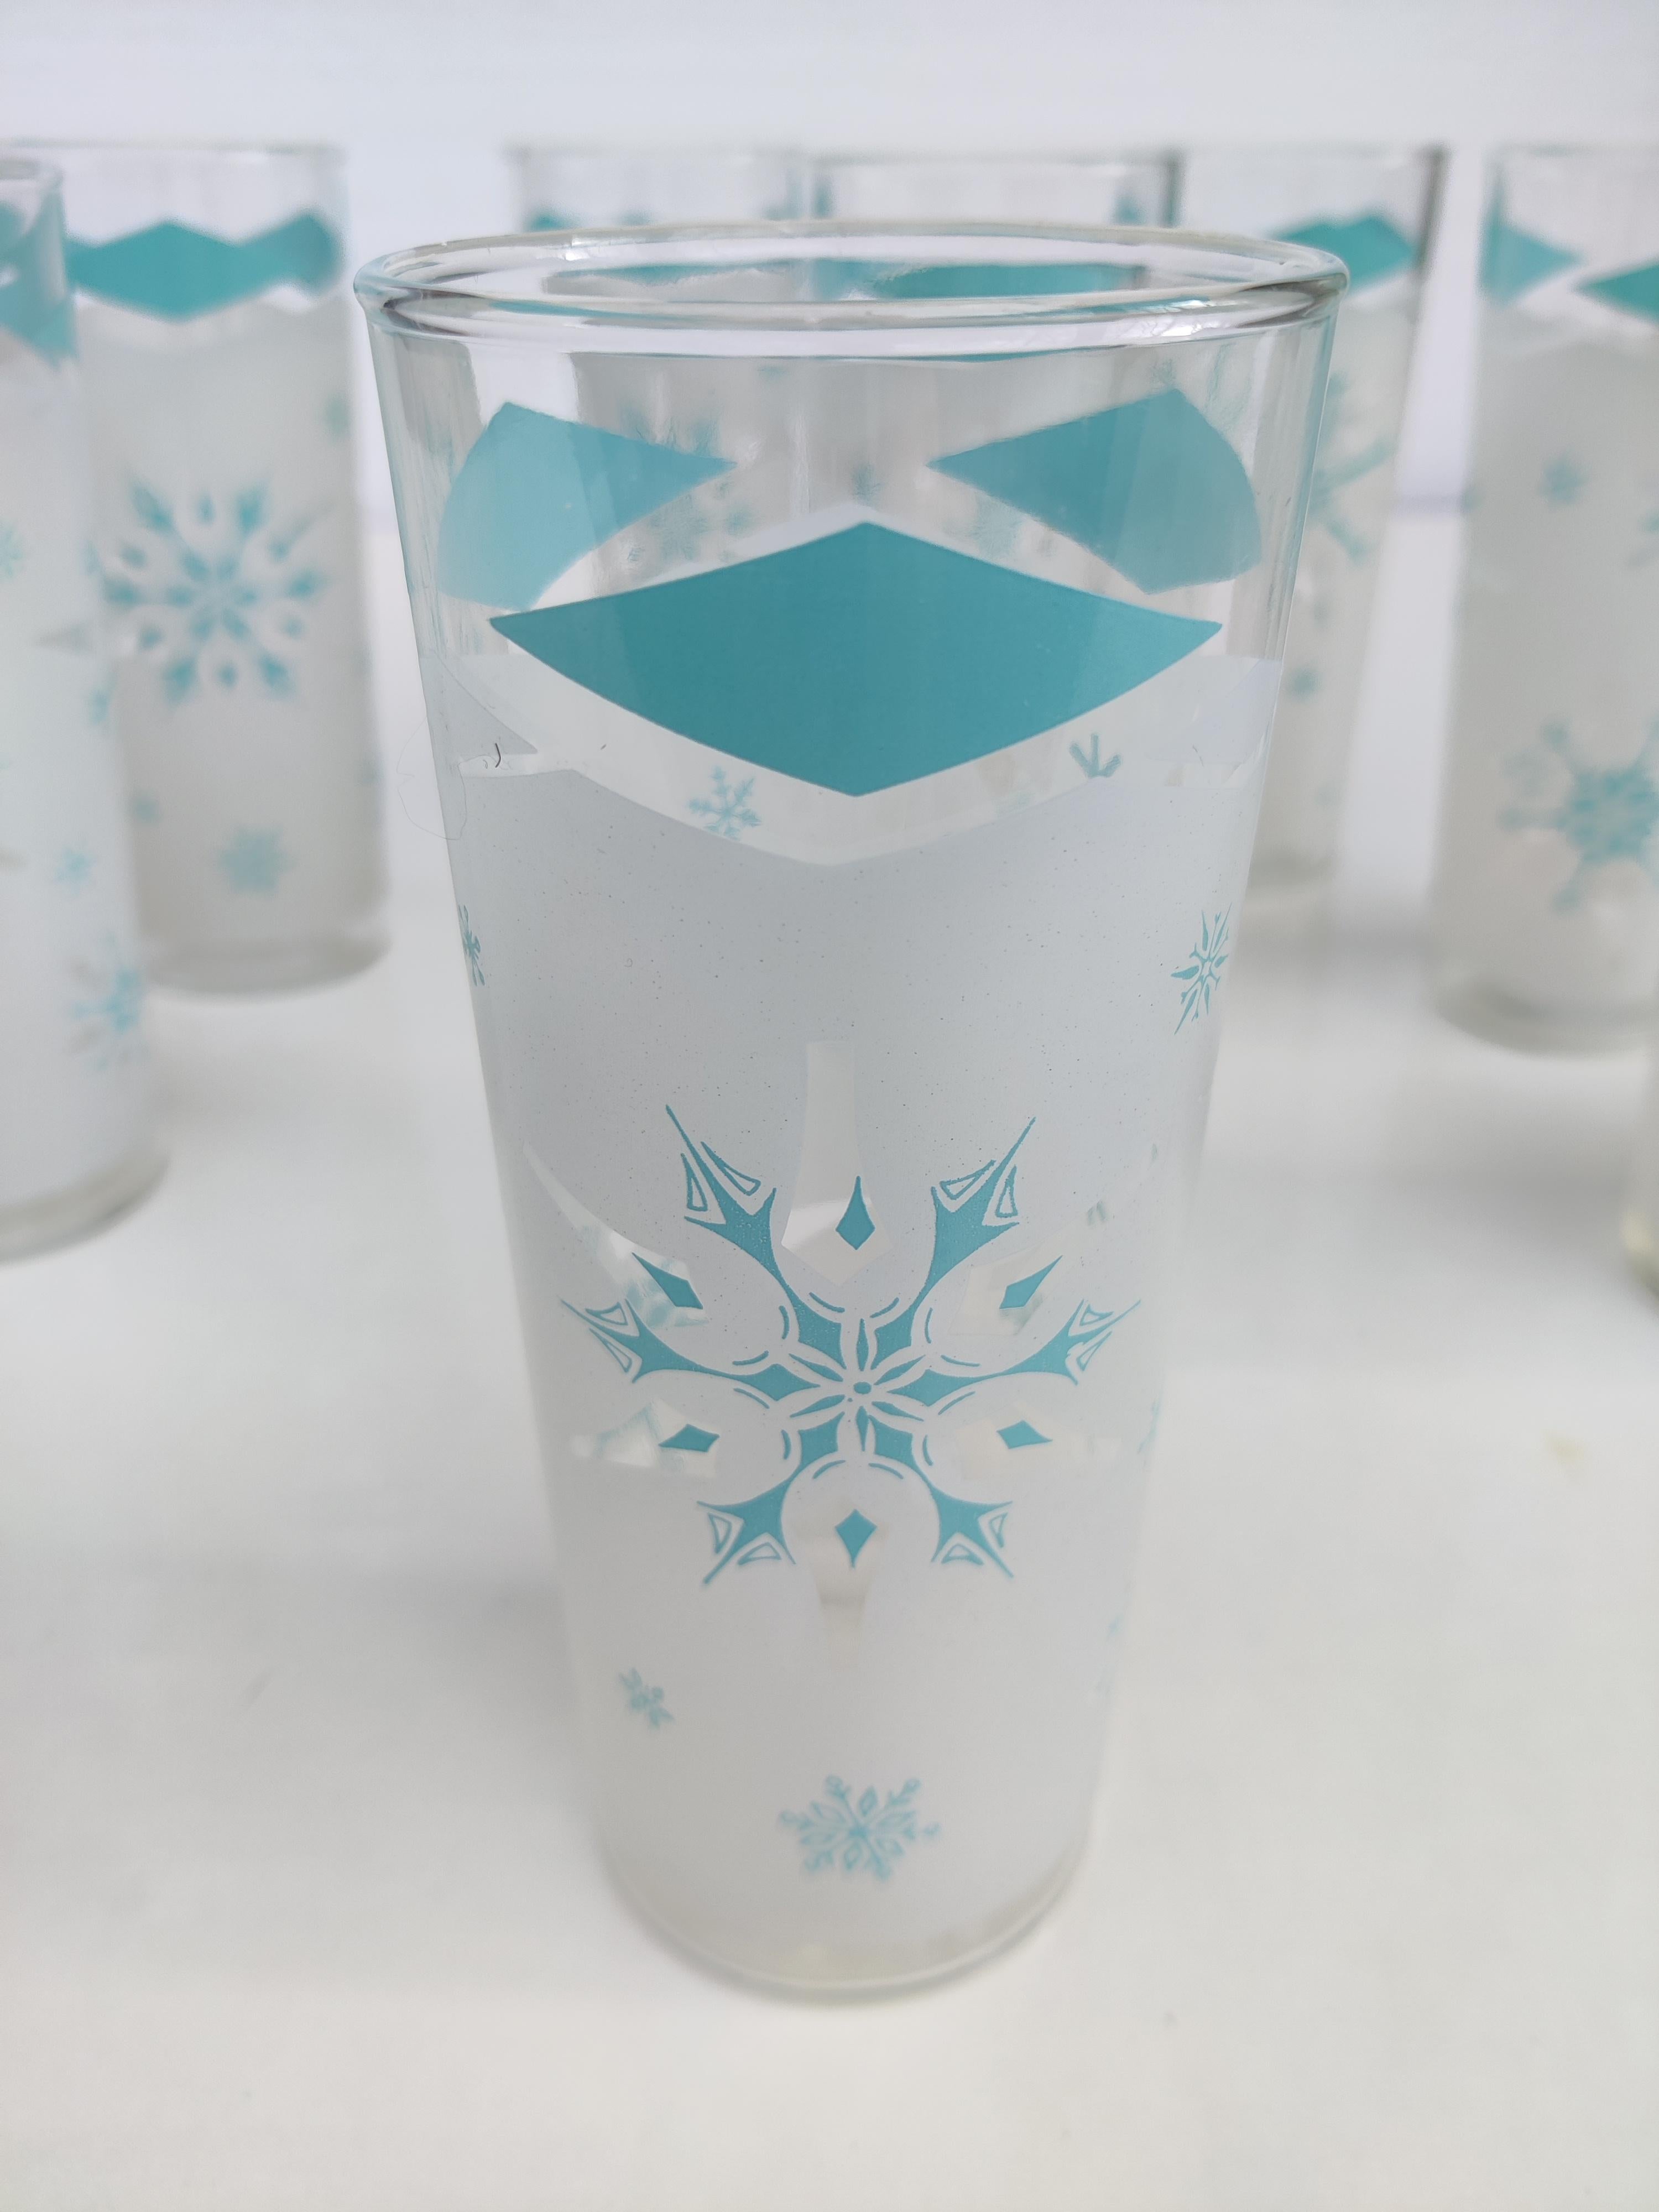 American Mid-century Anchor Hocking Atomic Snowflake Glasses Set of 8 For Sale